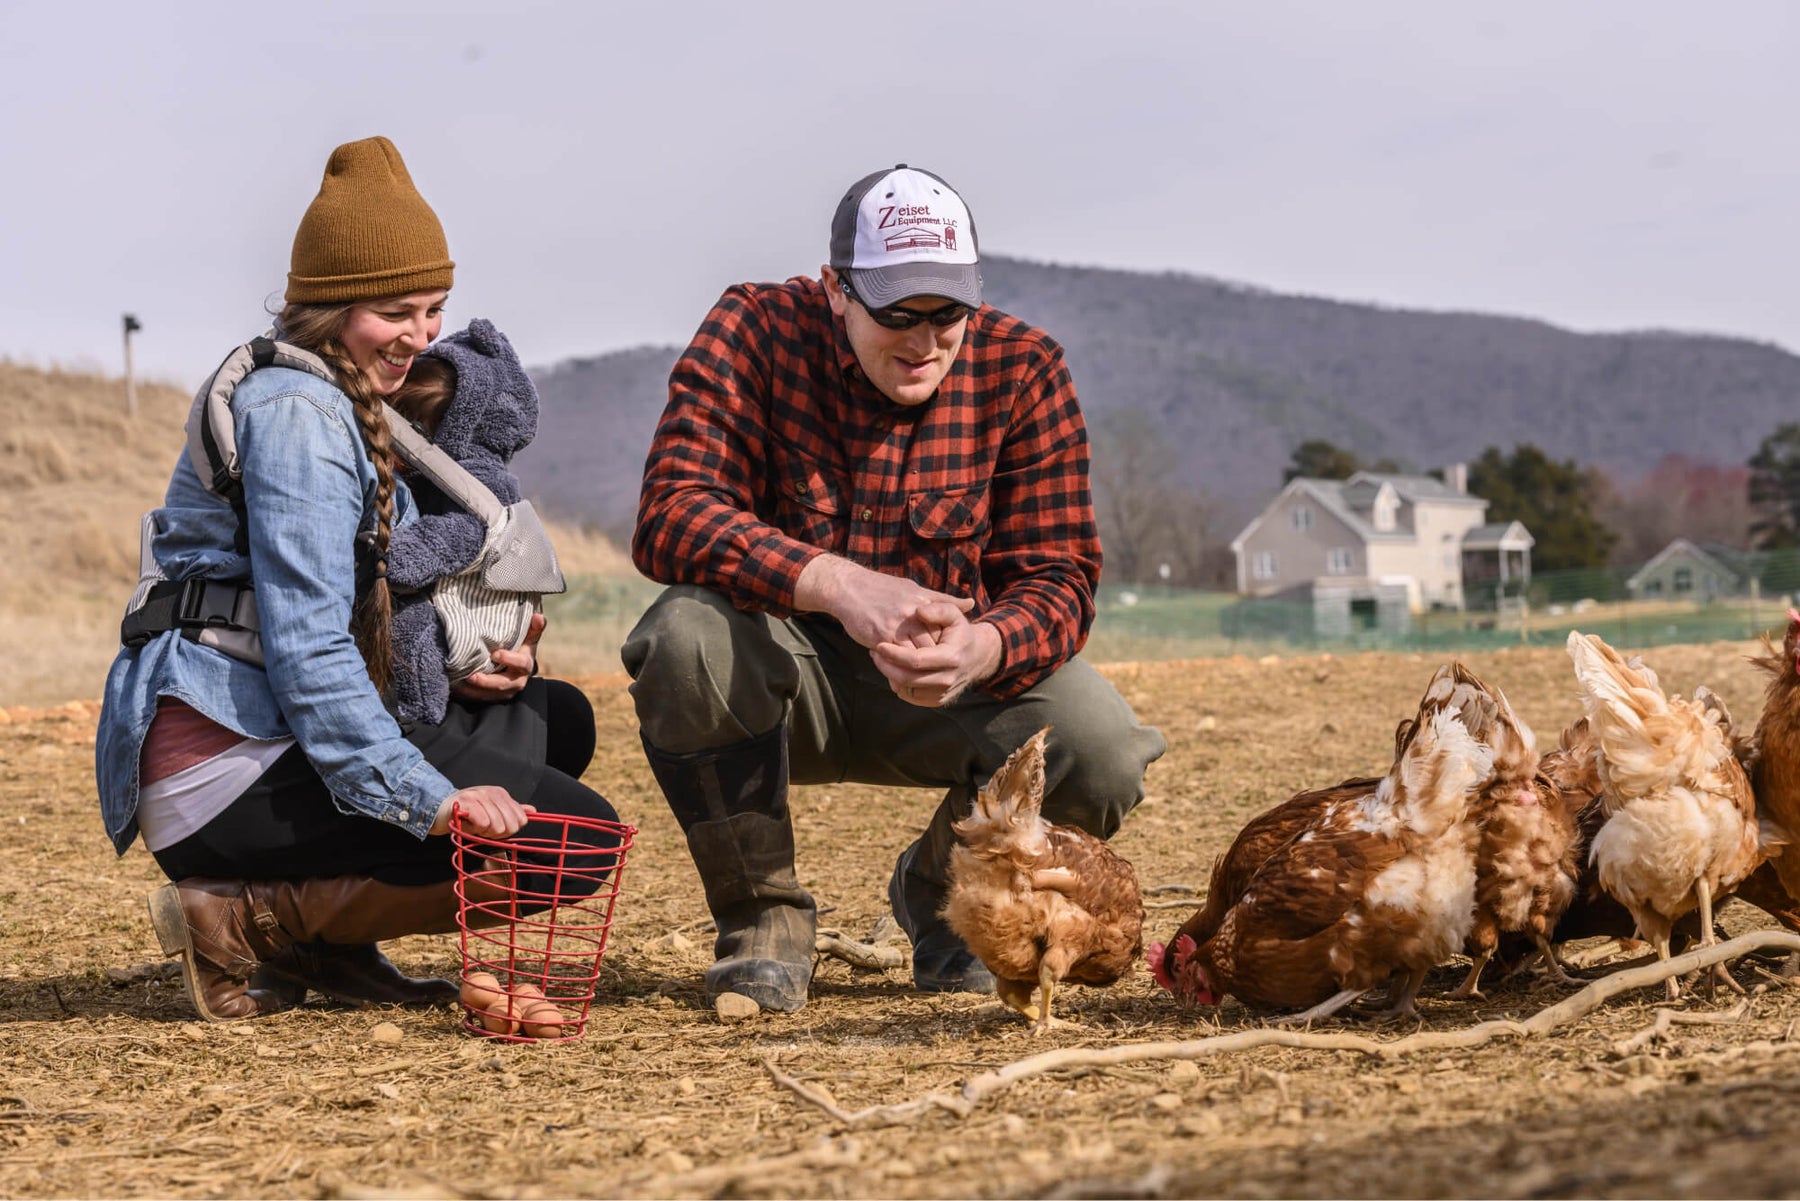 A man, woman, and baby taking eggs from a group of chickens on a farm